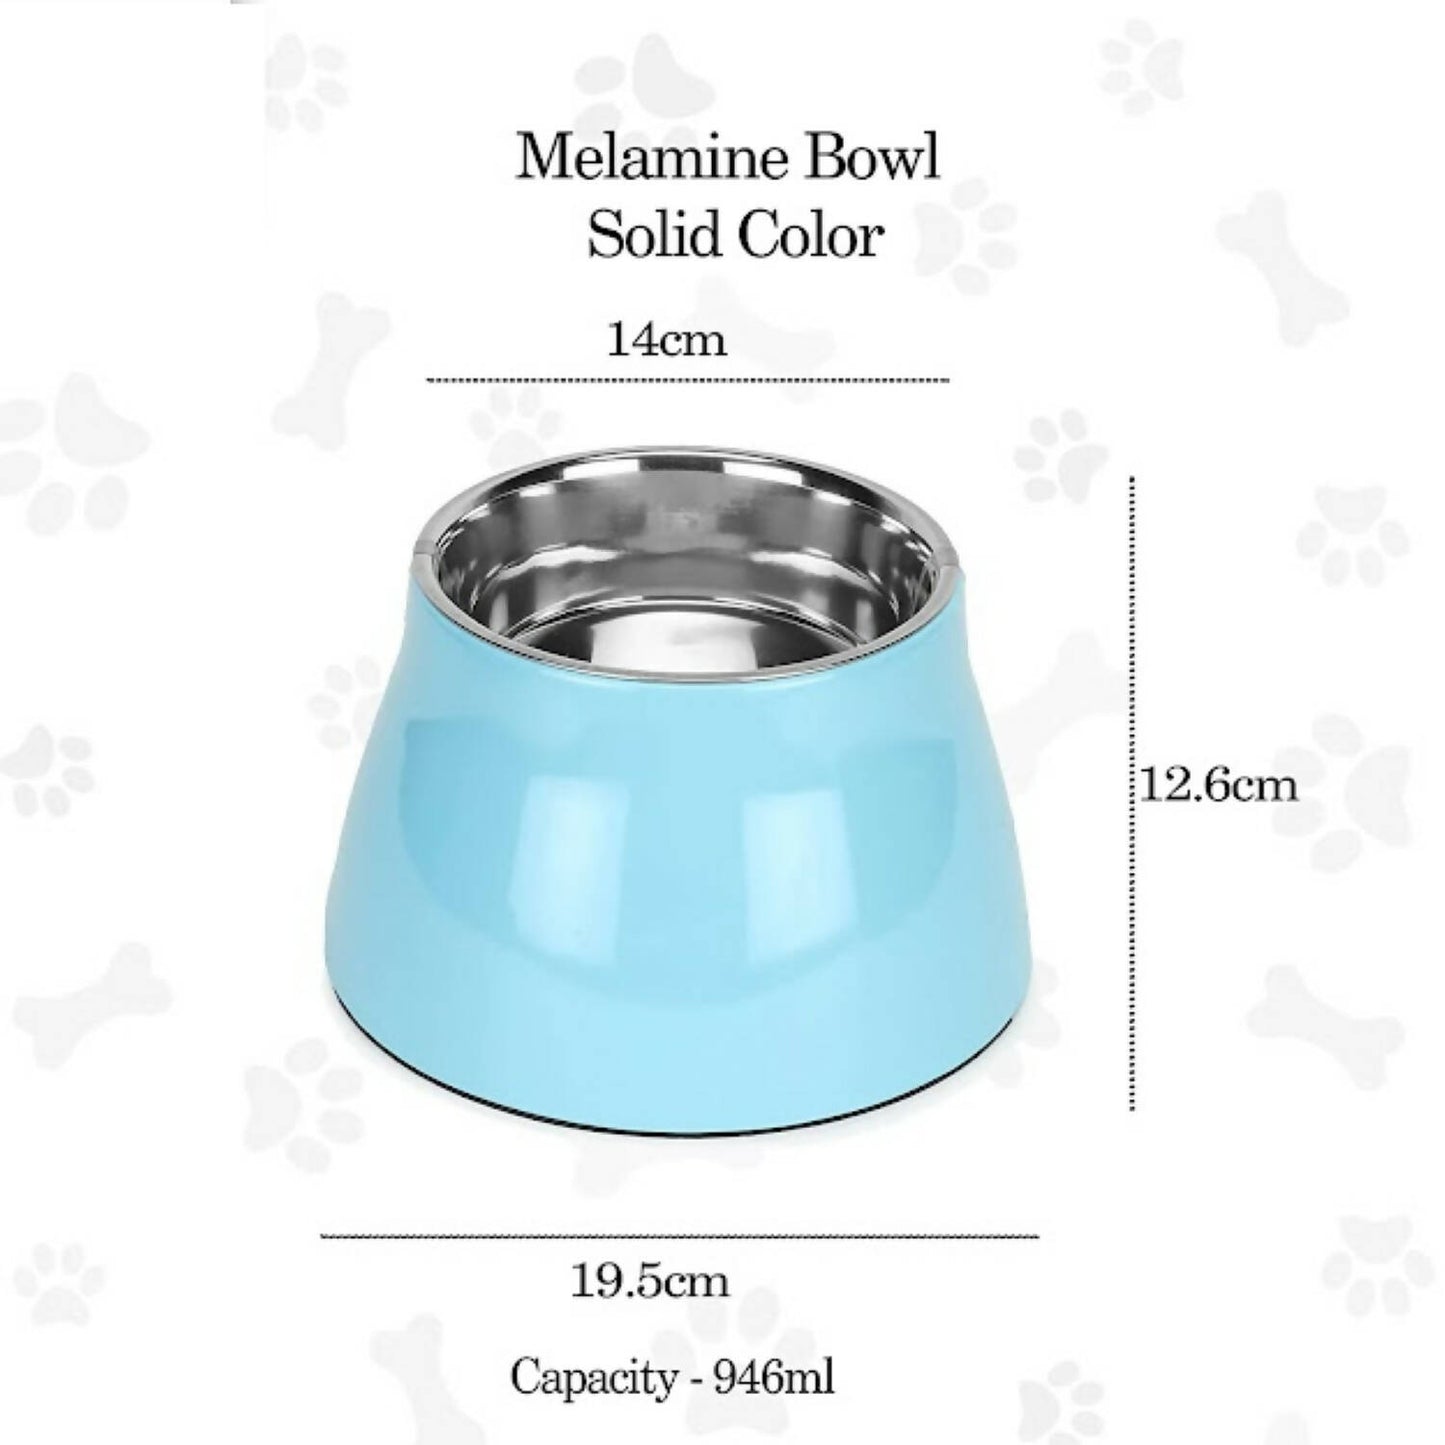 Basil - Elevated Bowl For Dogs